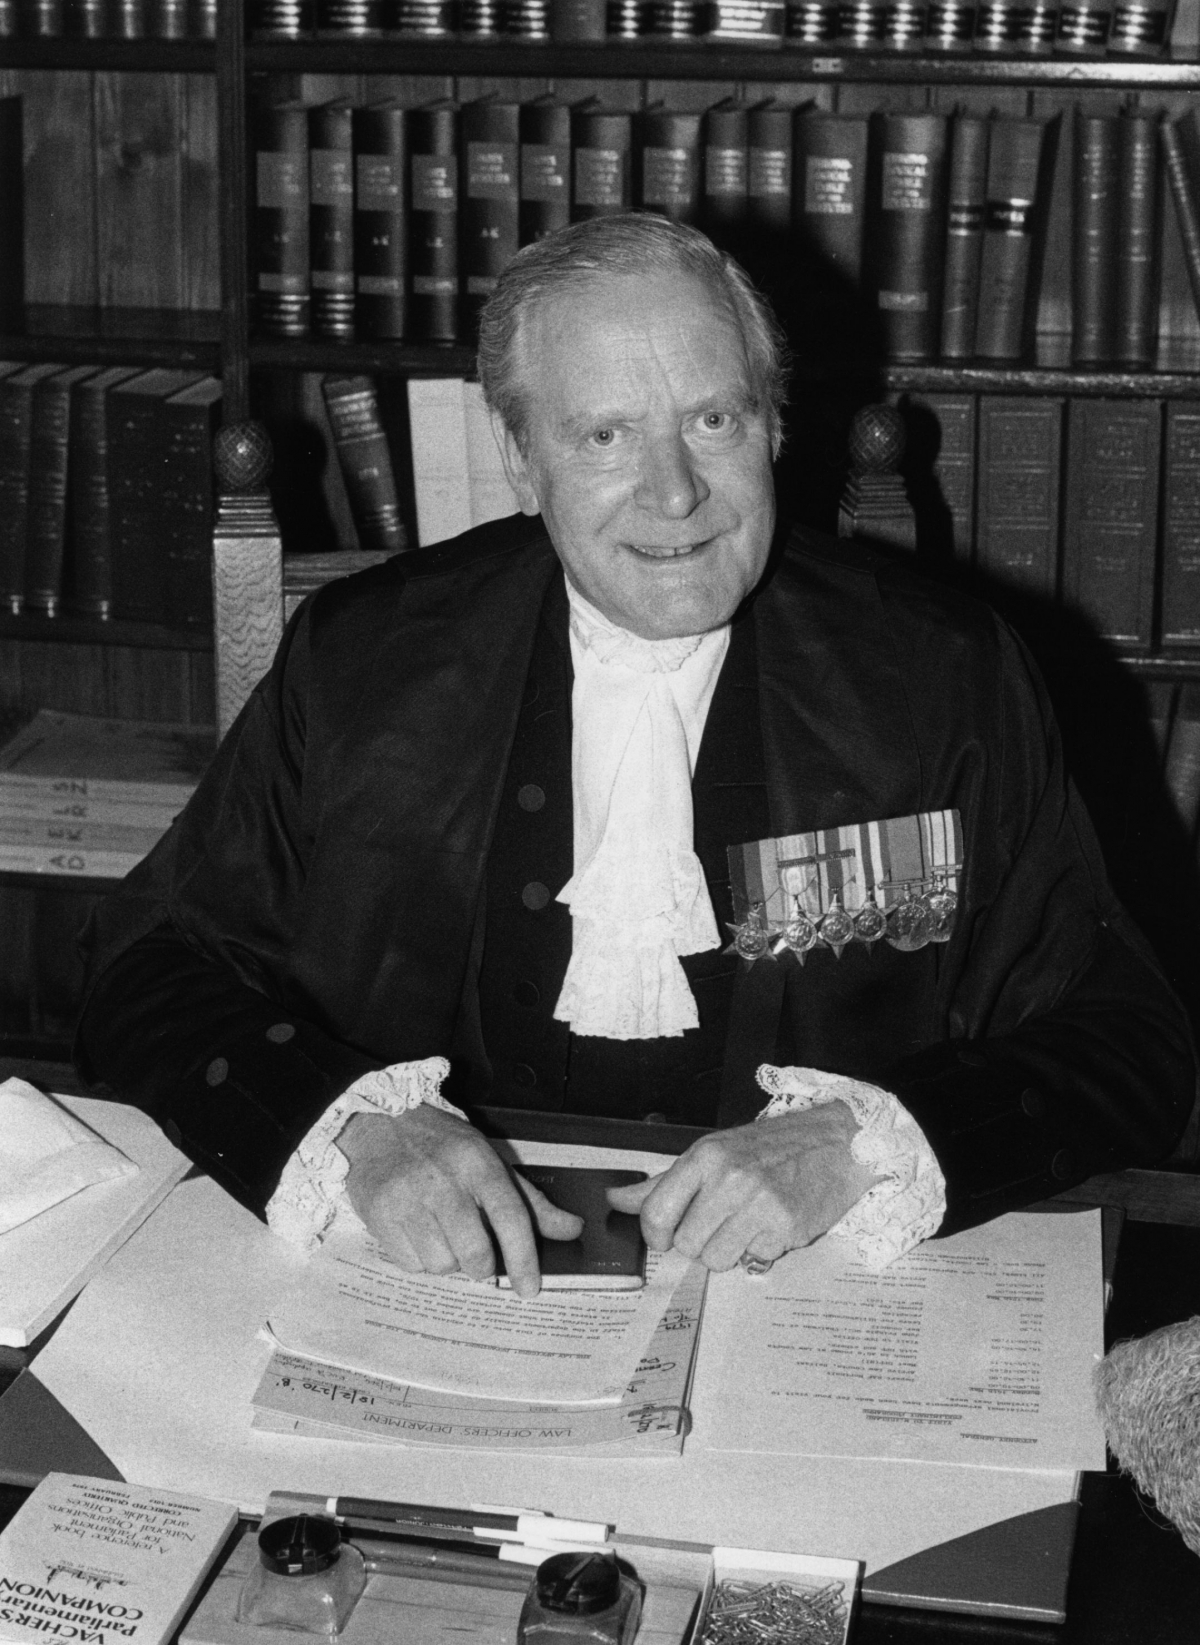 Sir Michael Havers, who died in 1992, was the Attorney General for England and Wales from 1979-1987